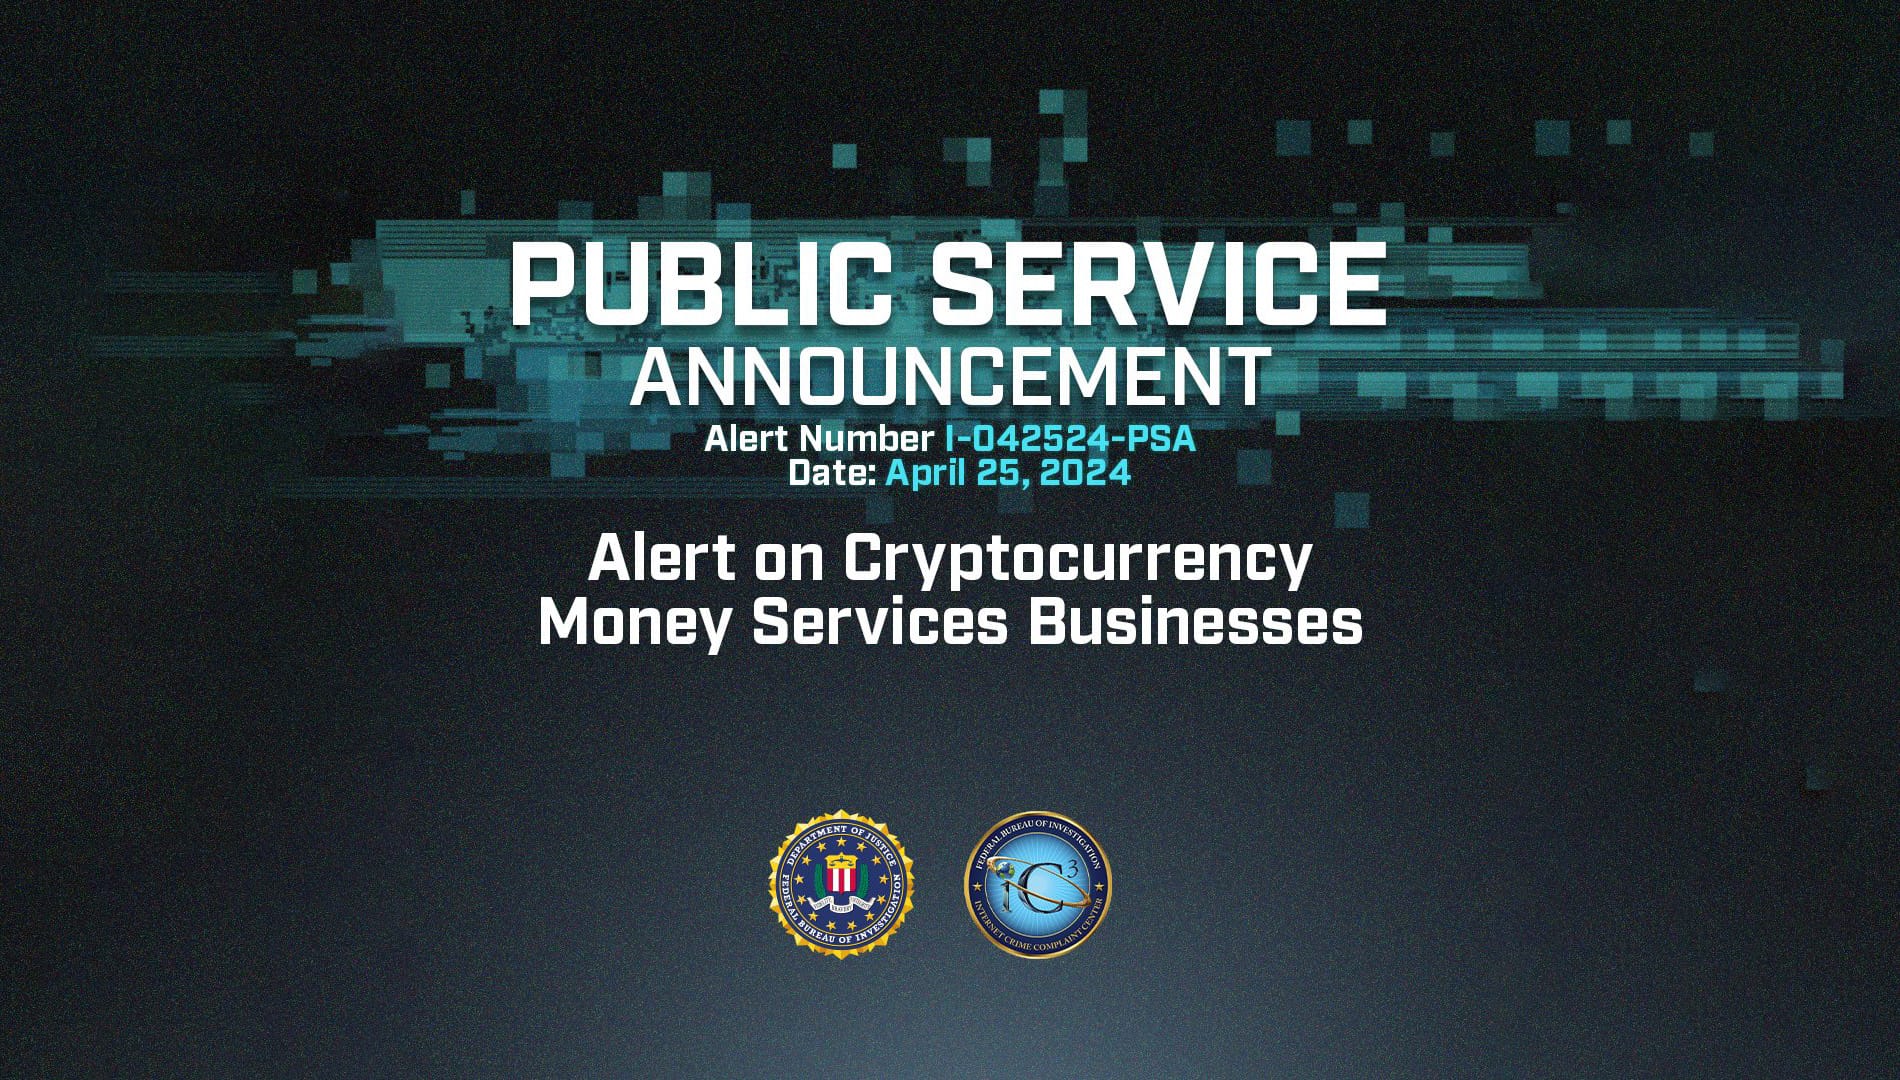 FBI Issues Warning Against Using 'No-KYC Cryptocurrency Money Transmitting Services'